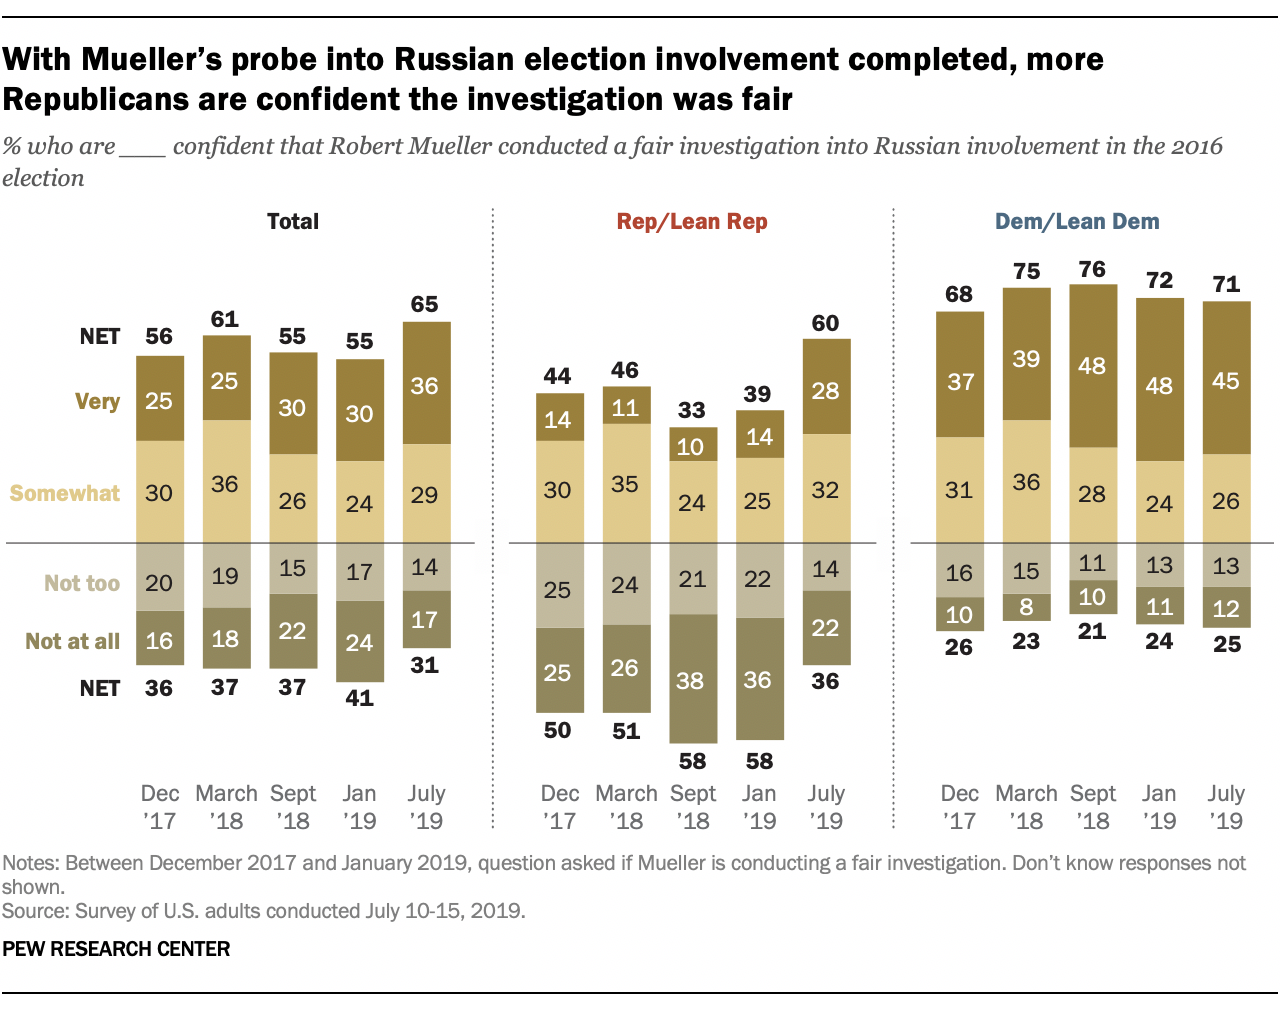 With Mueller's probe into Russian election involvement completed, more Republicans are confident the investigation was fair